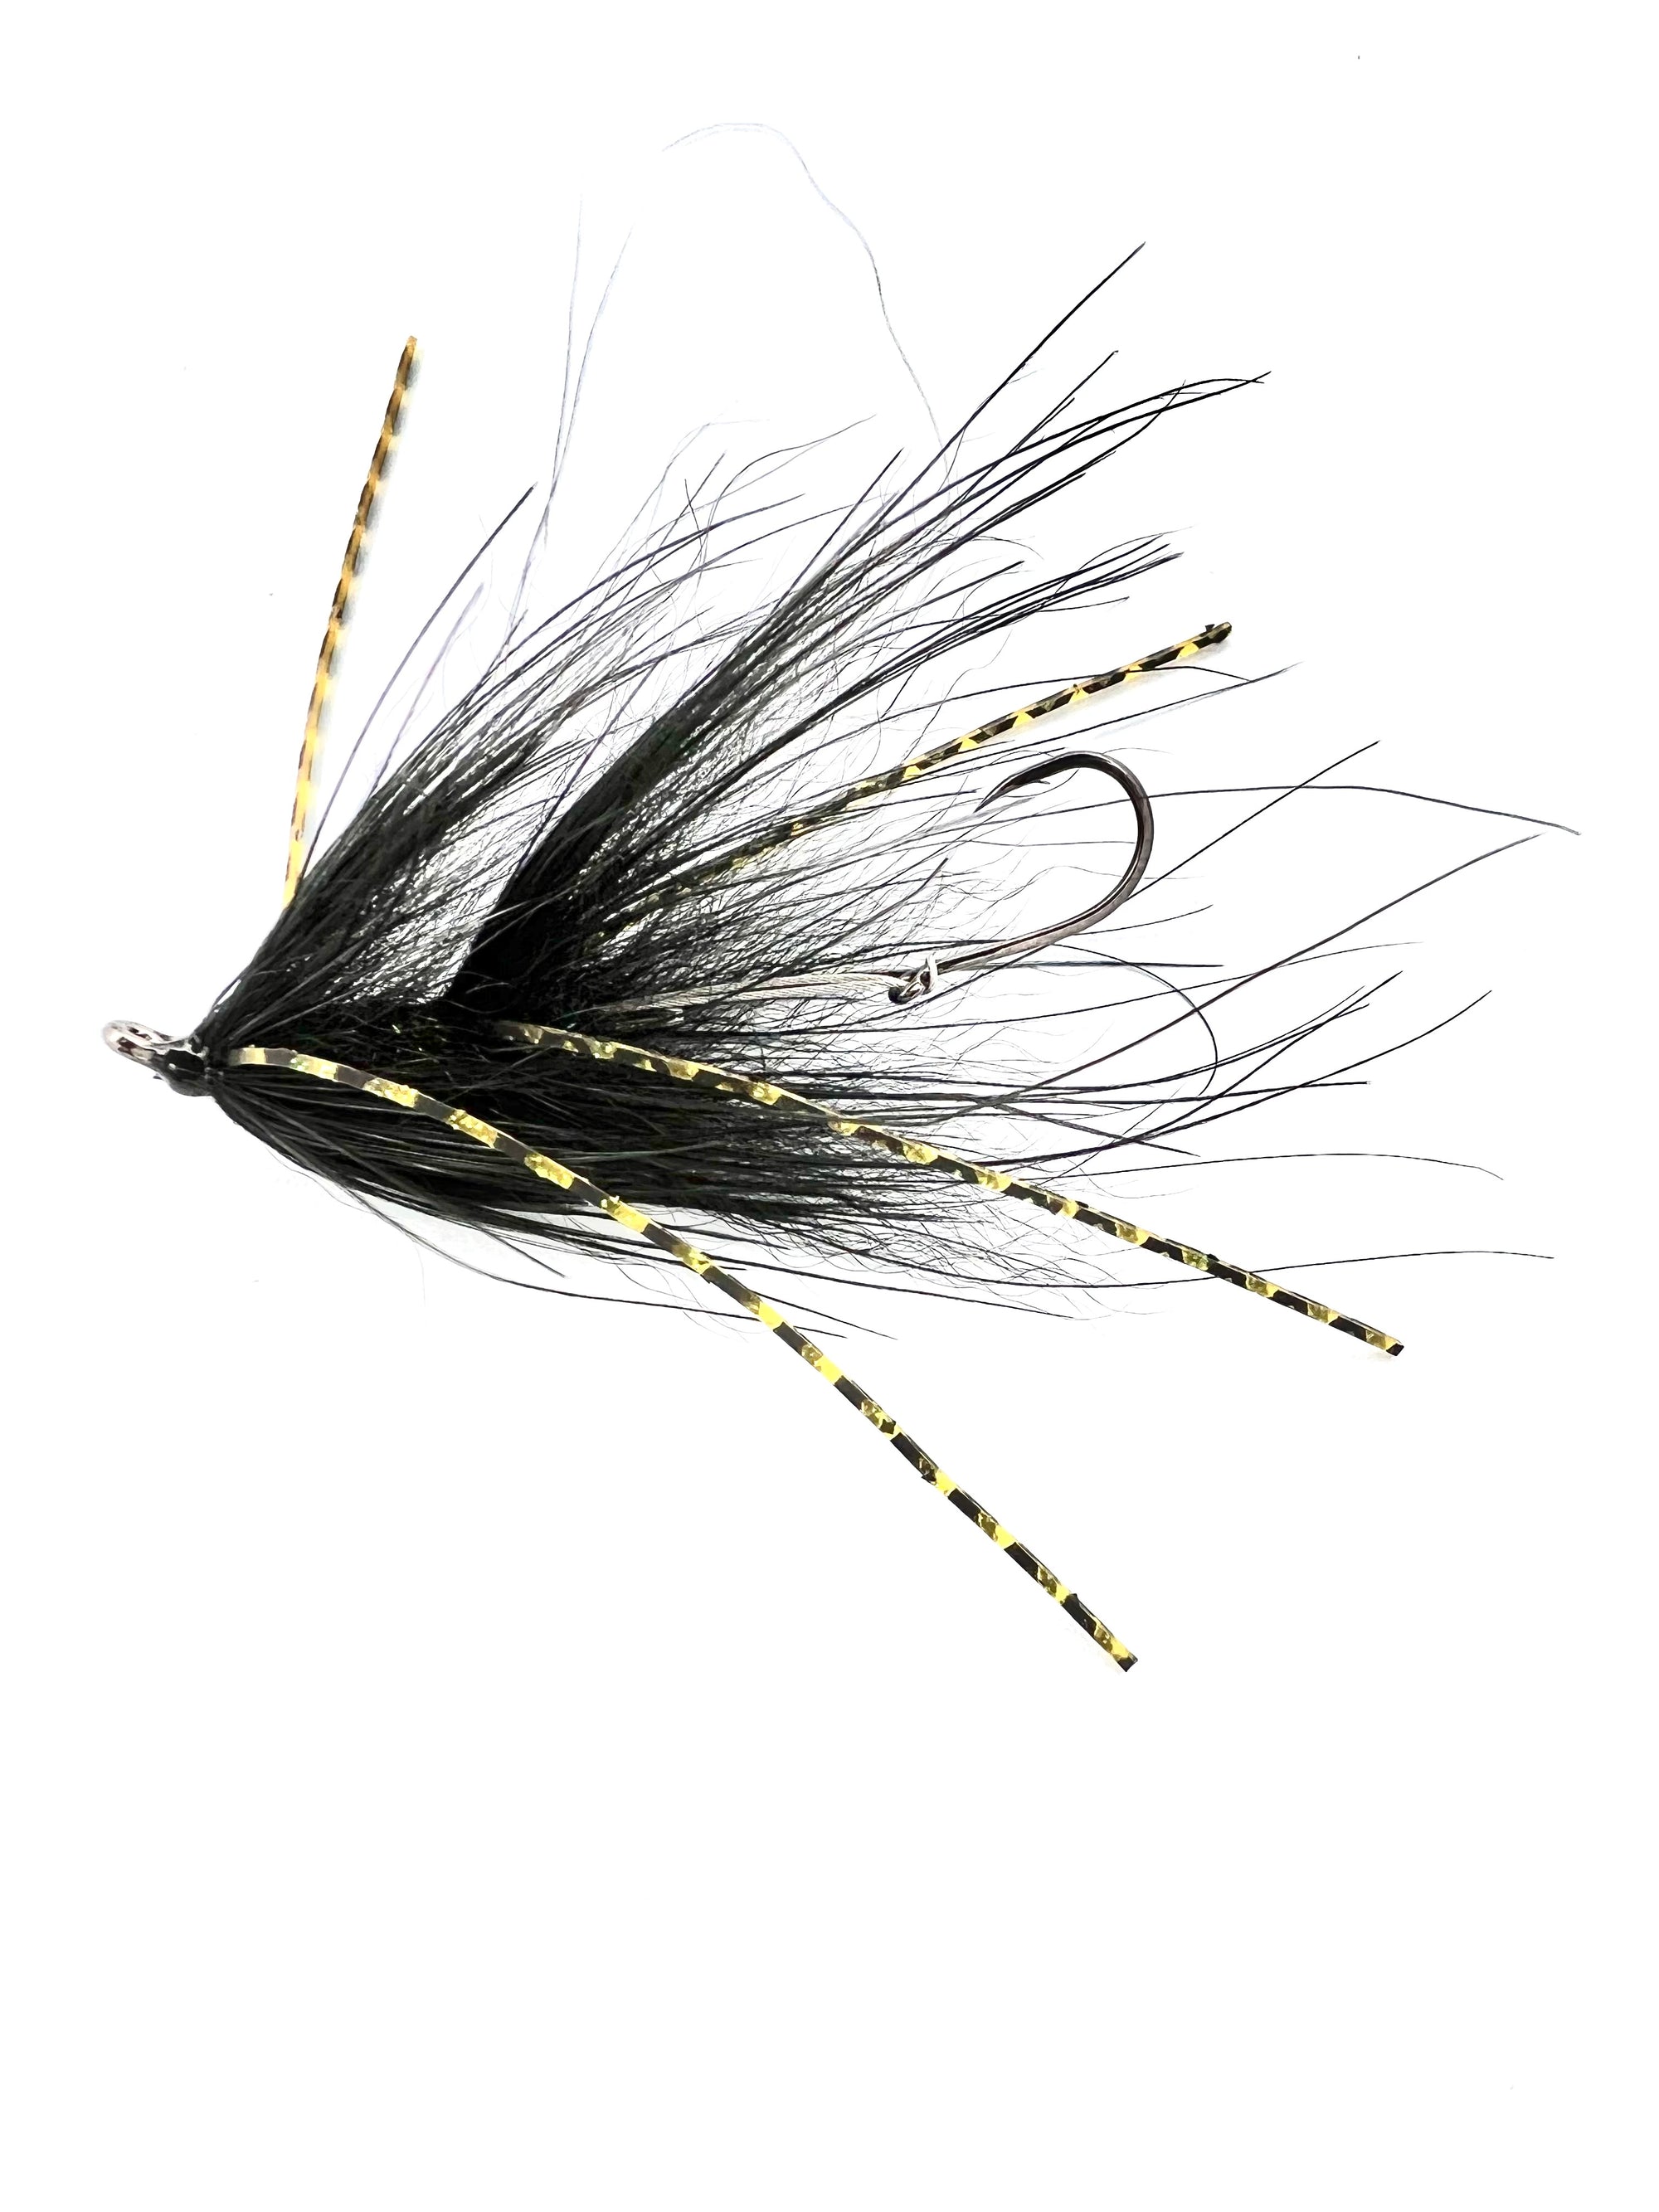 Trout Spey wooly bugger intruder thing. Size 6 opst swing hook as a stinger.  : r/flytying